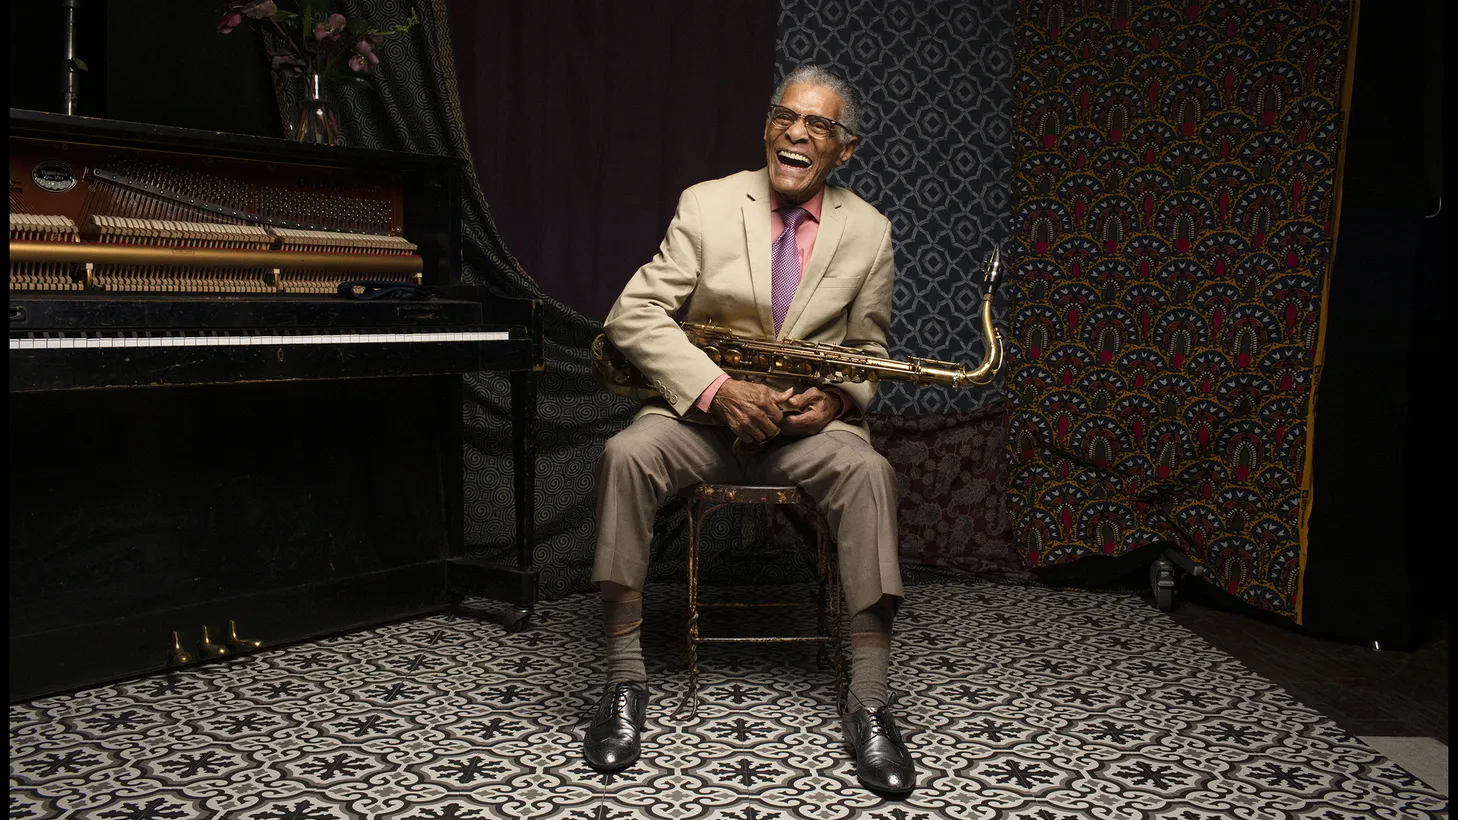 At age 89, Charlie Gabriel is the most senior member of the legendary New Orleans jazz ensemble Preservation Hall Jazz Band.